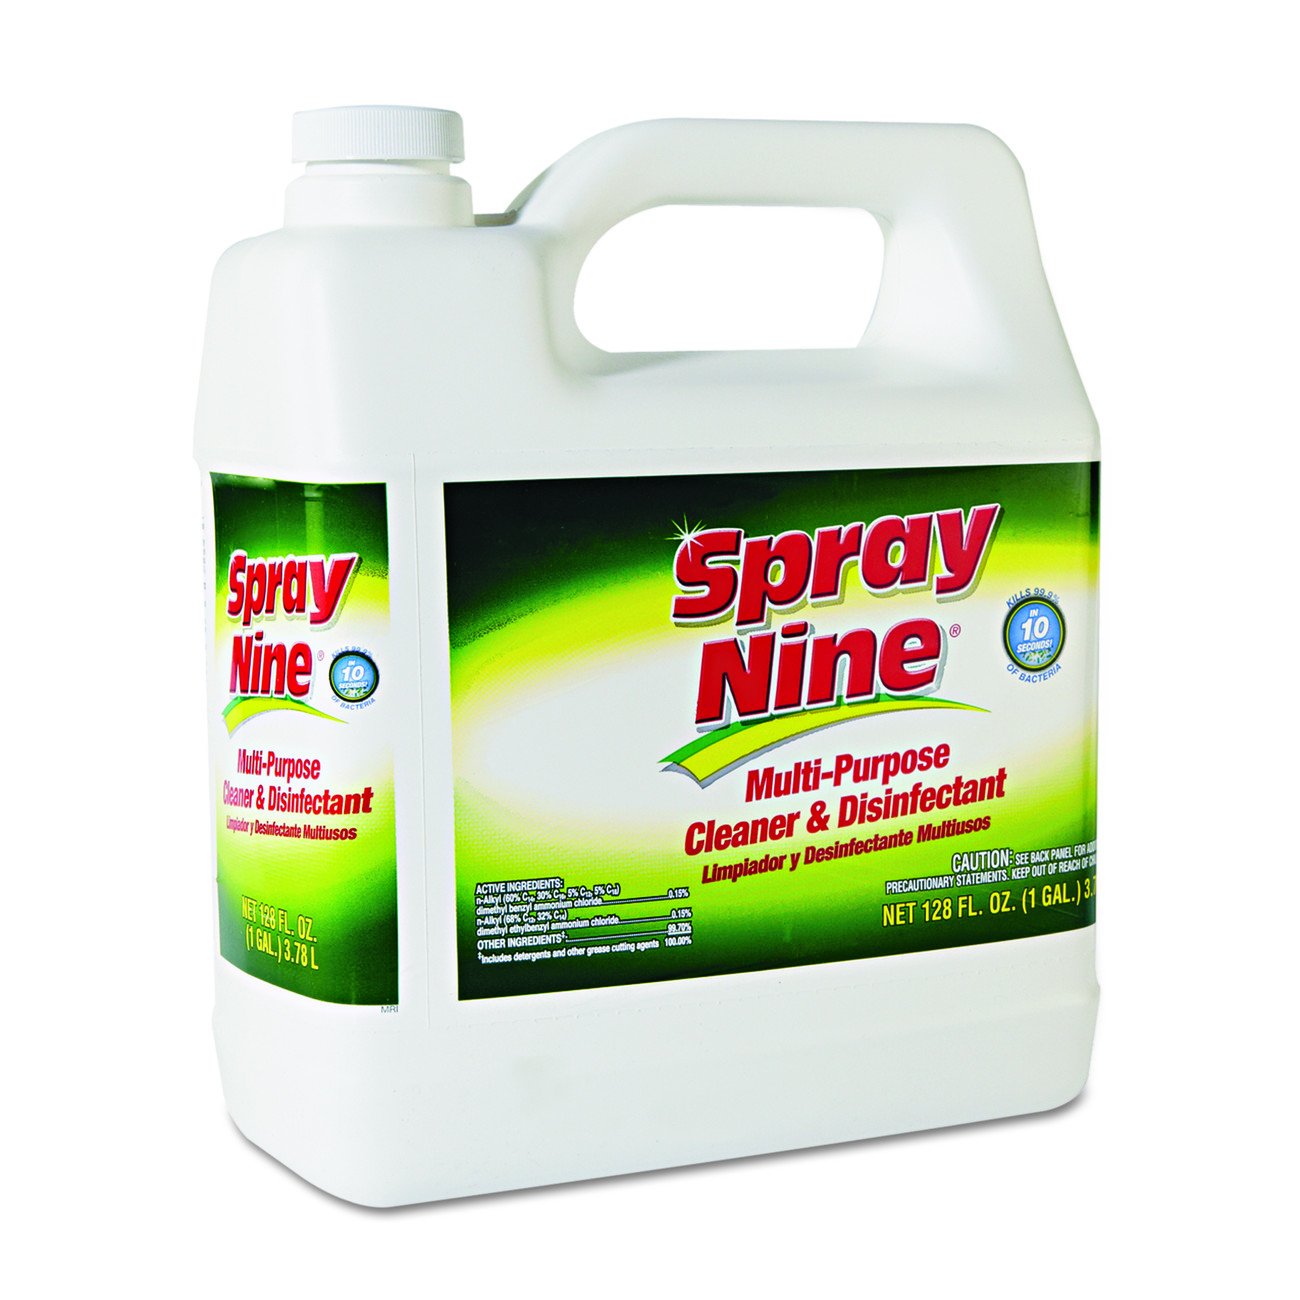 Spray Nine Permatex Heavy Duty Cleaner, Degreaser and Disinfectant, Multipurpose Cleaner for Common Automotive Shop, Home, Industrial, and Commercial Uses